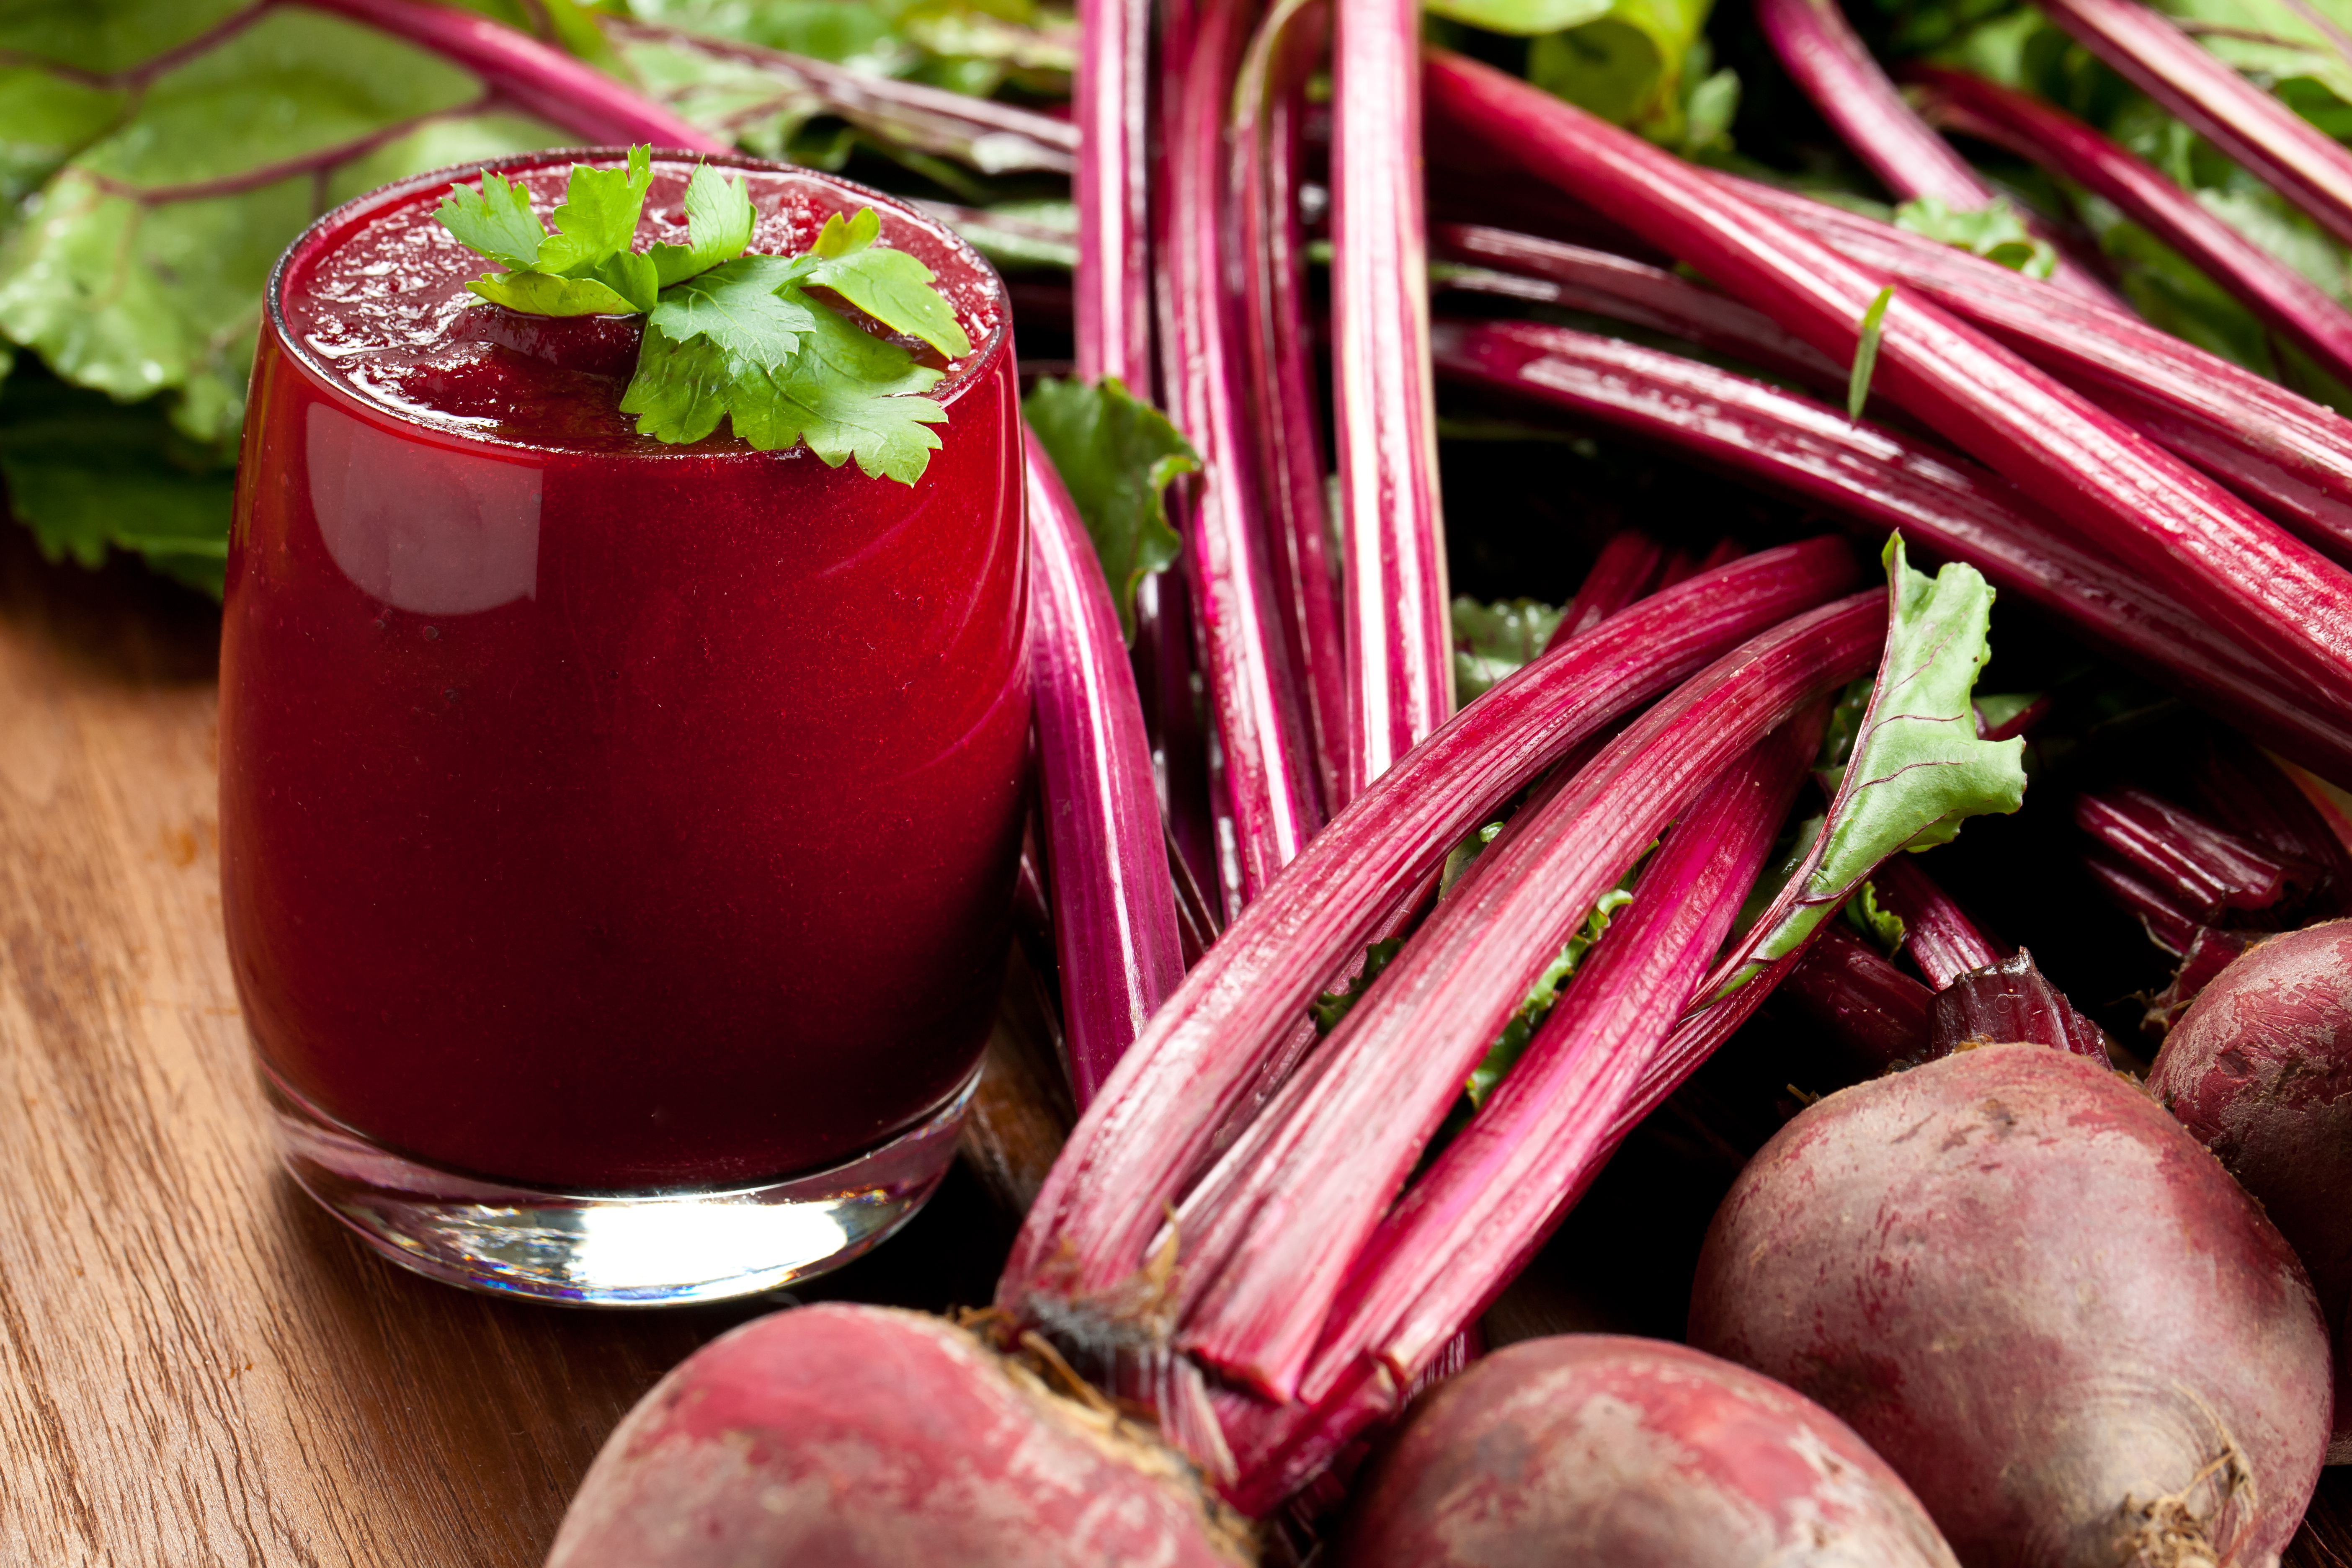 Can an Entire Glass of Beet Juice Go Undigested?